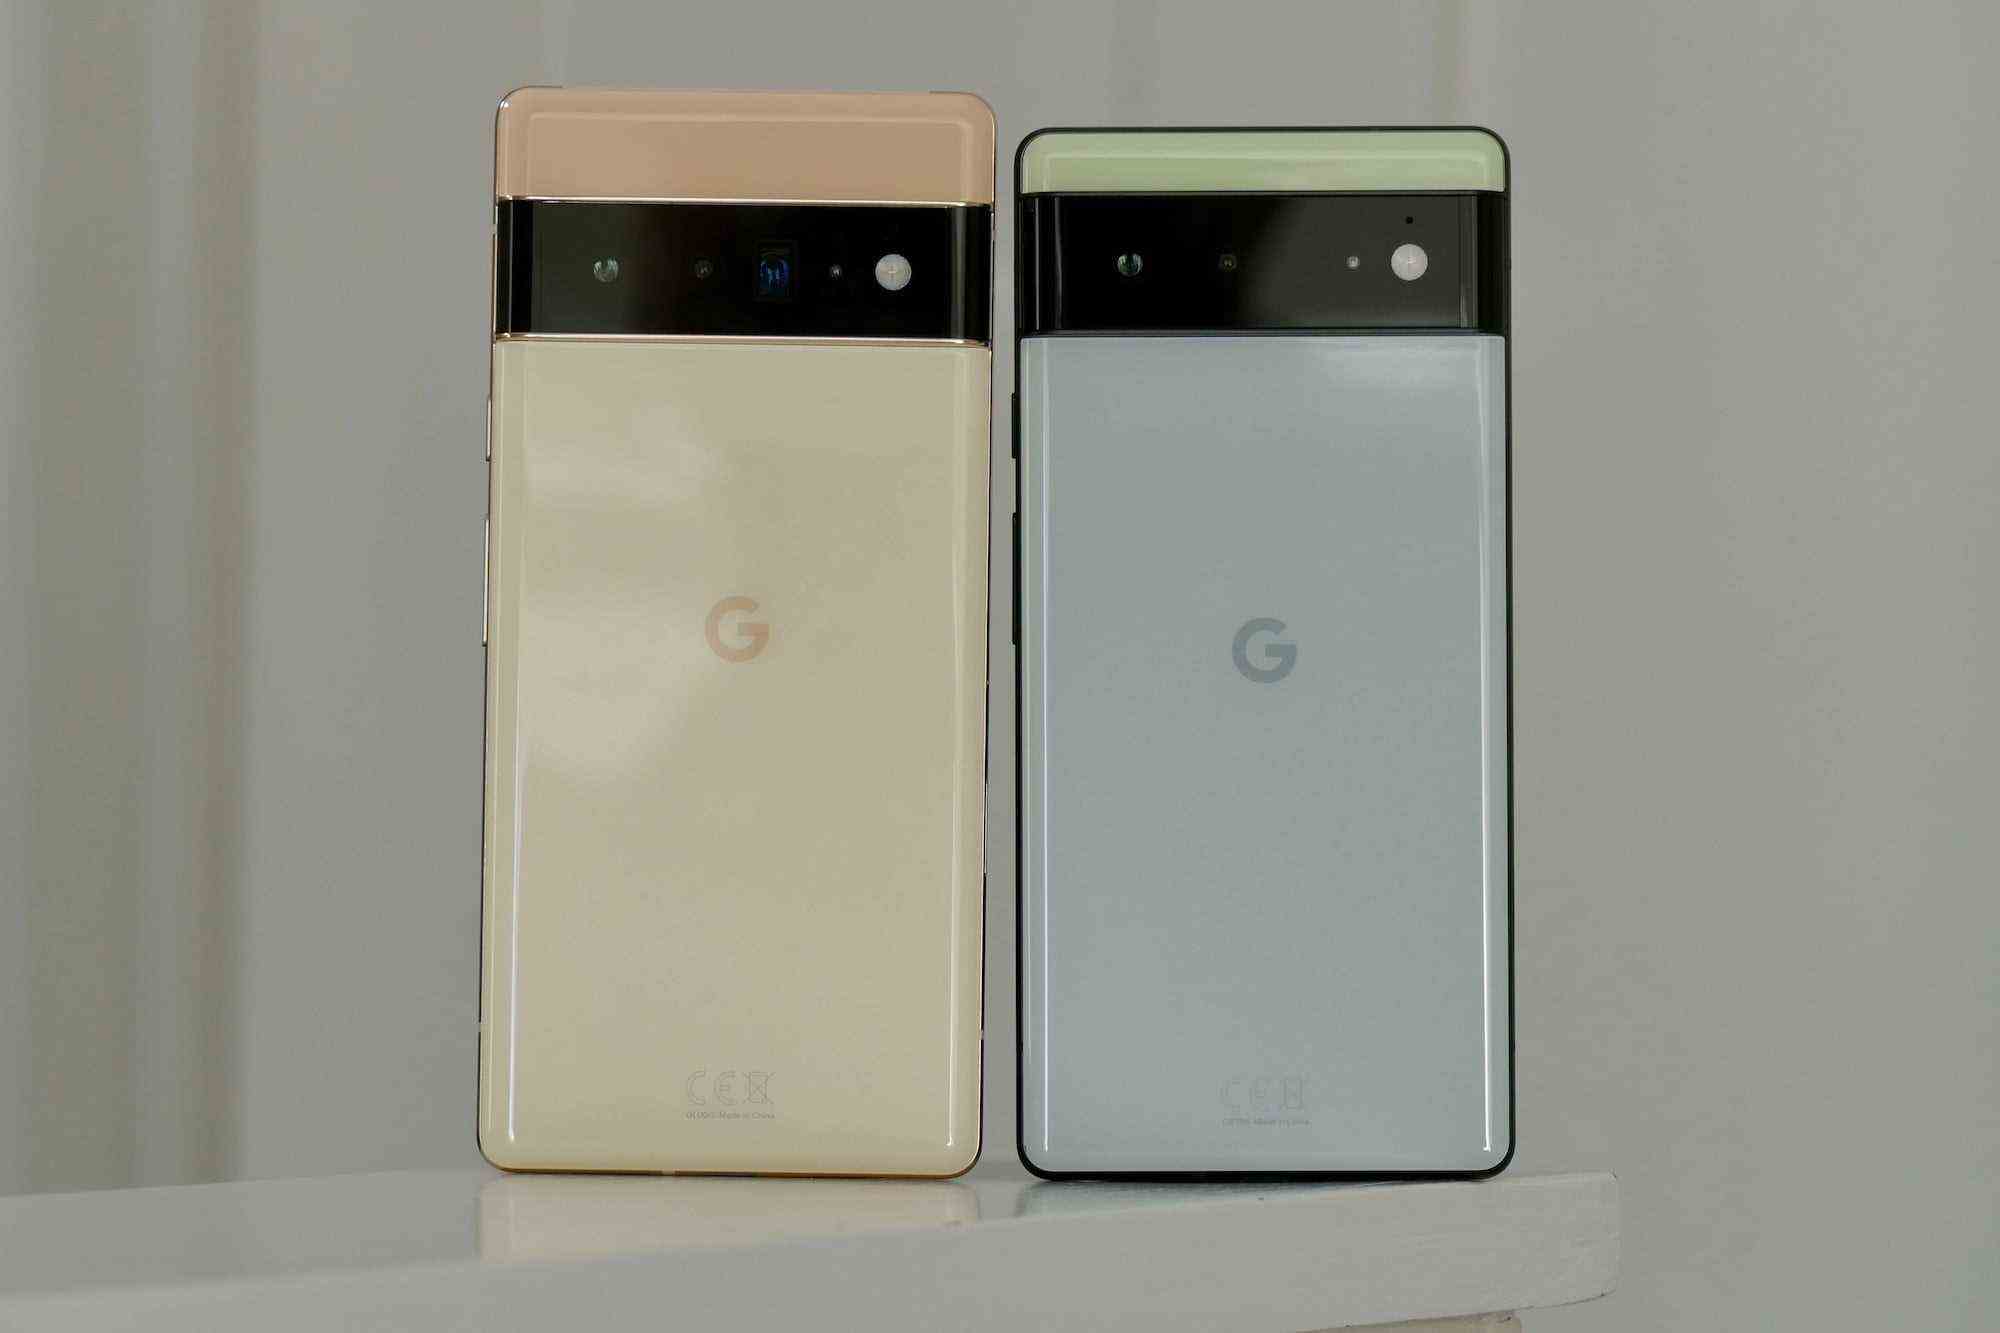 Pixel 6 Pro (left) and Pixel 6 (right).